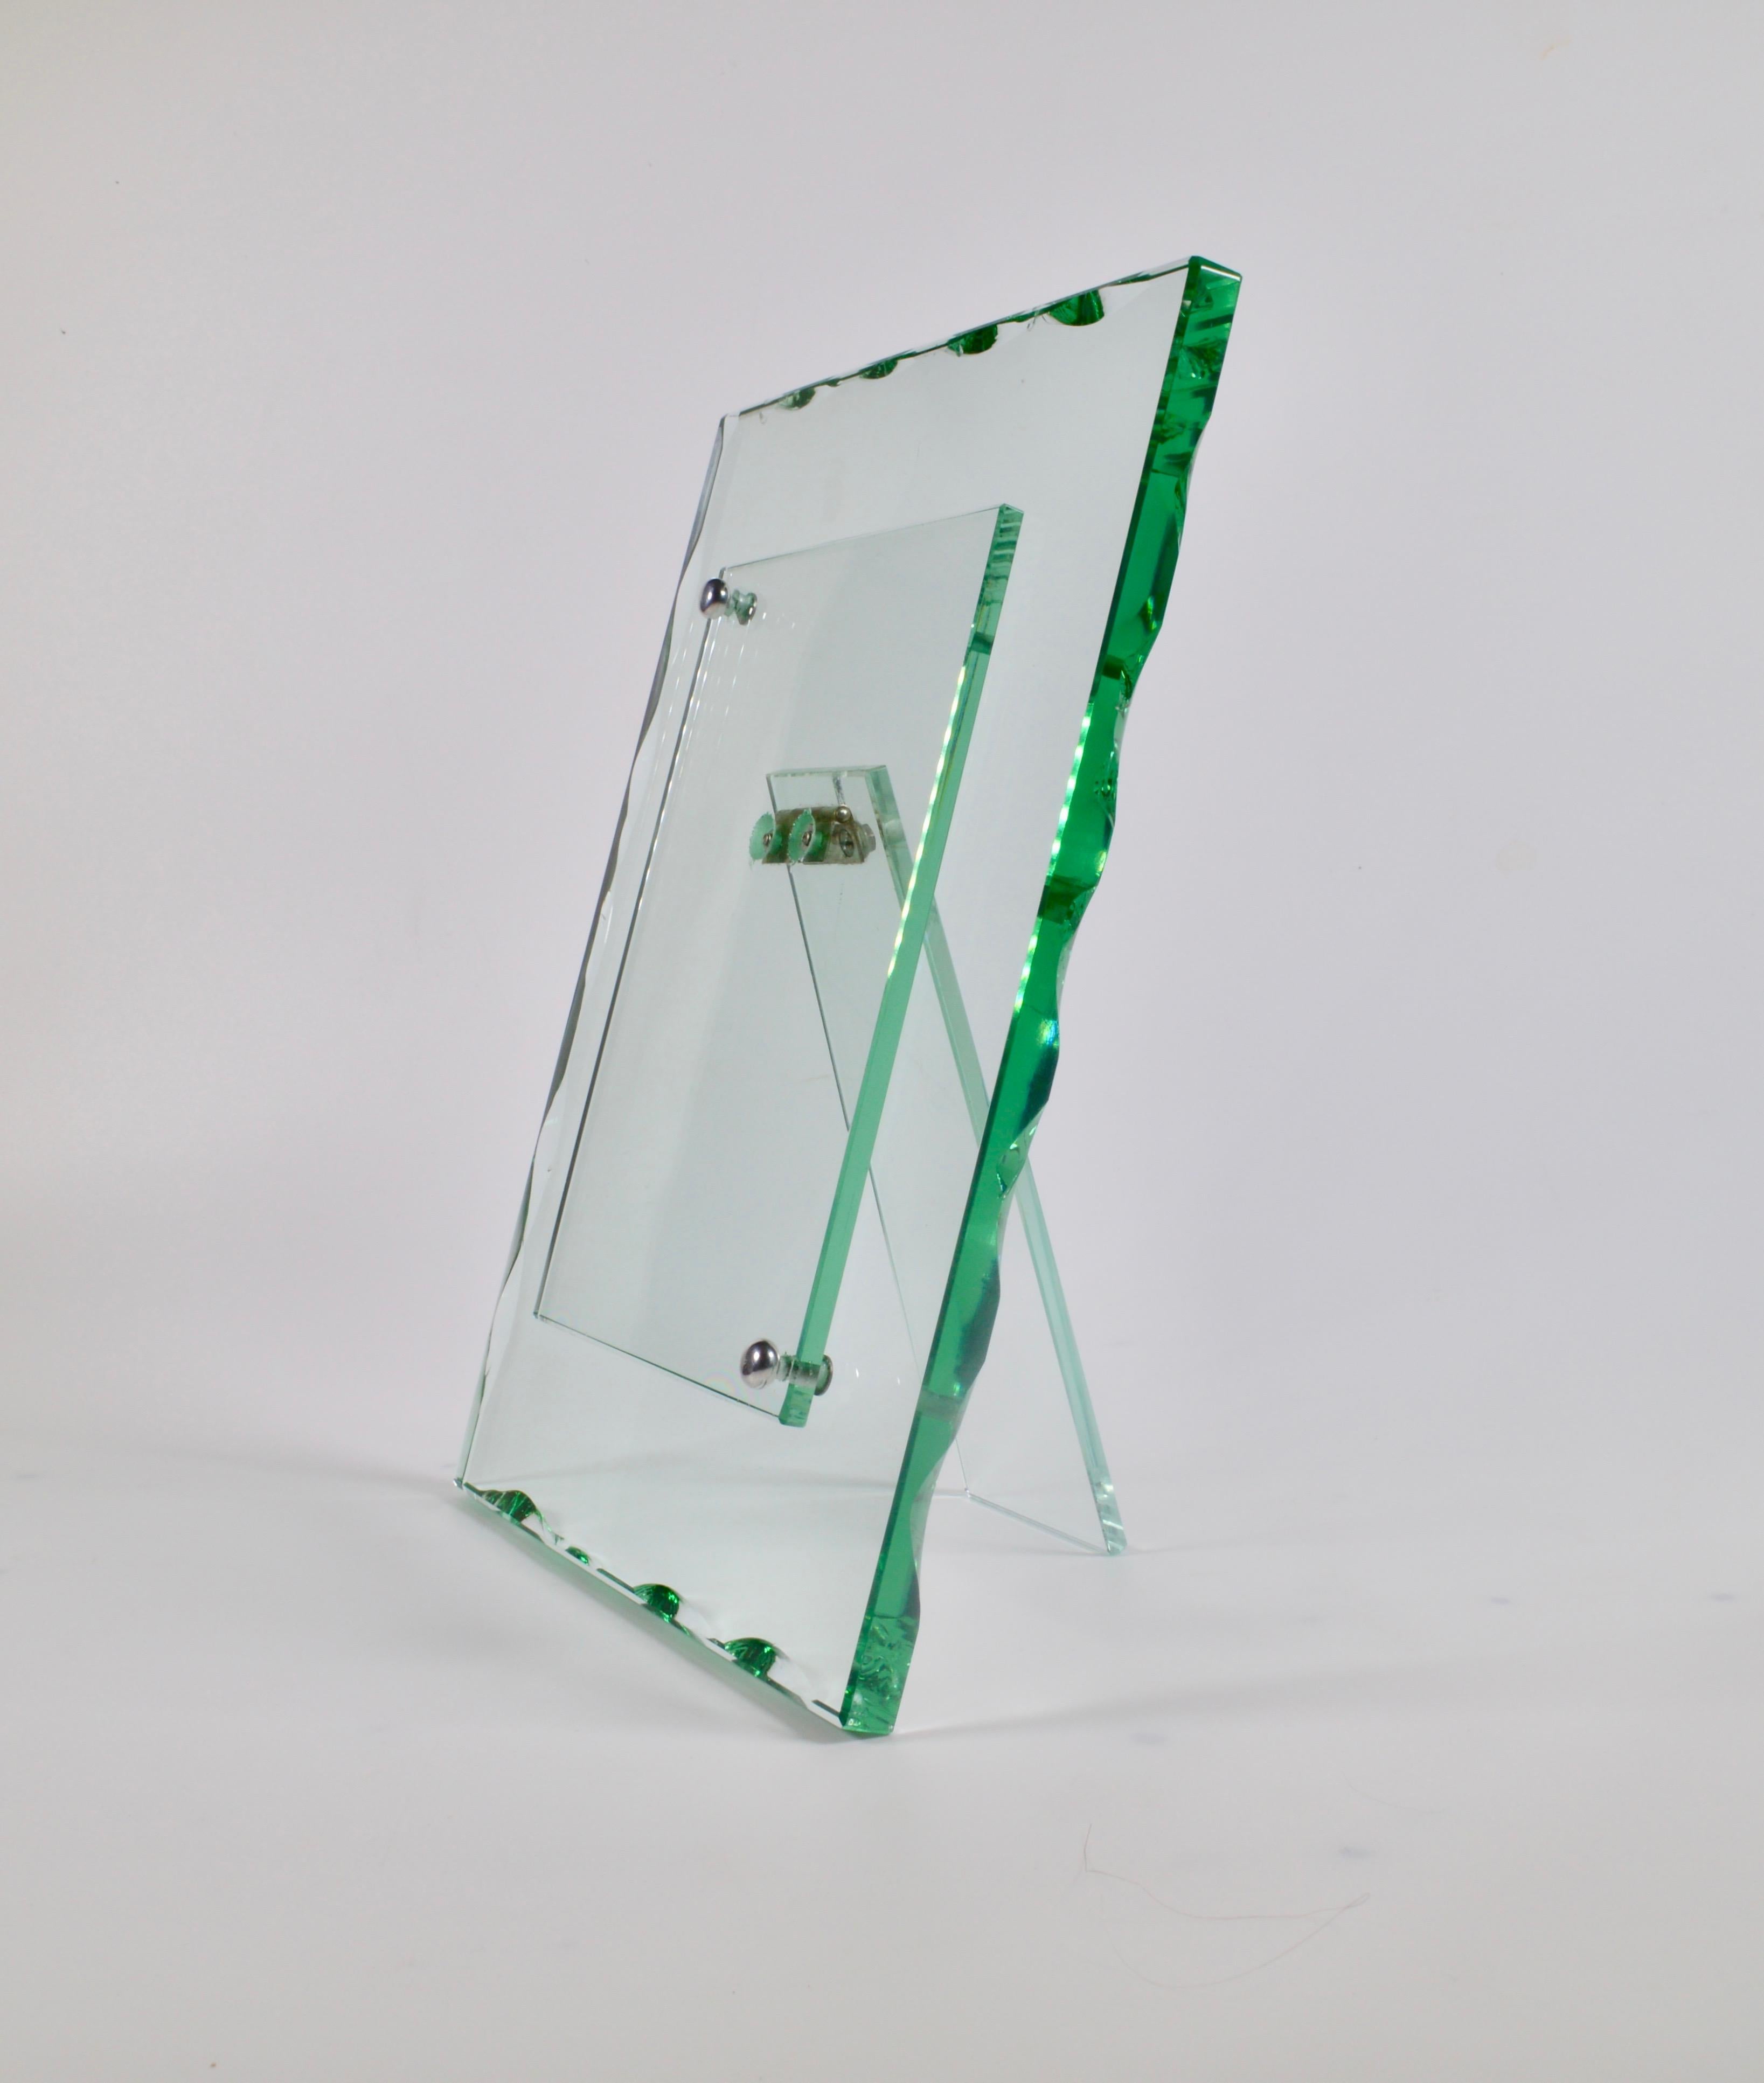 A beautiful cut glass photoframe by Fontana Arte from the 1940s with an indented polished green edge. The front piece is neatly secured with two nickel plated round button screws. 

27.5 x 21